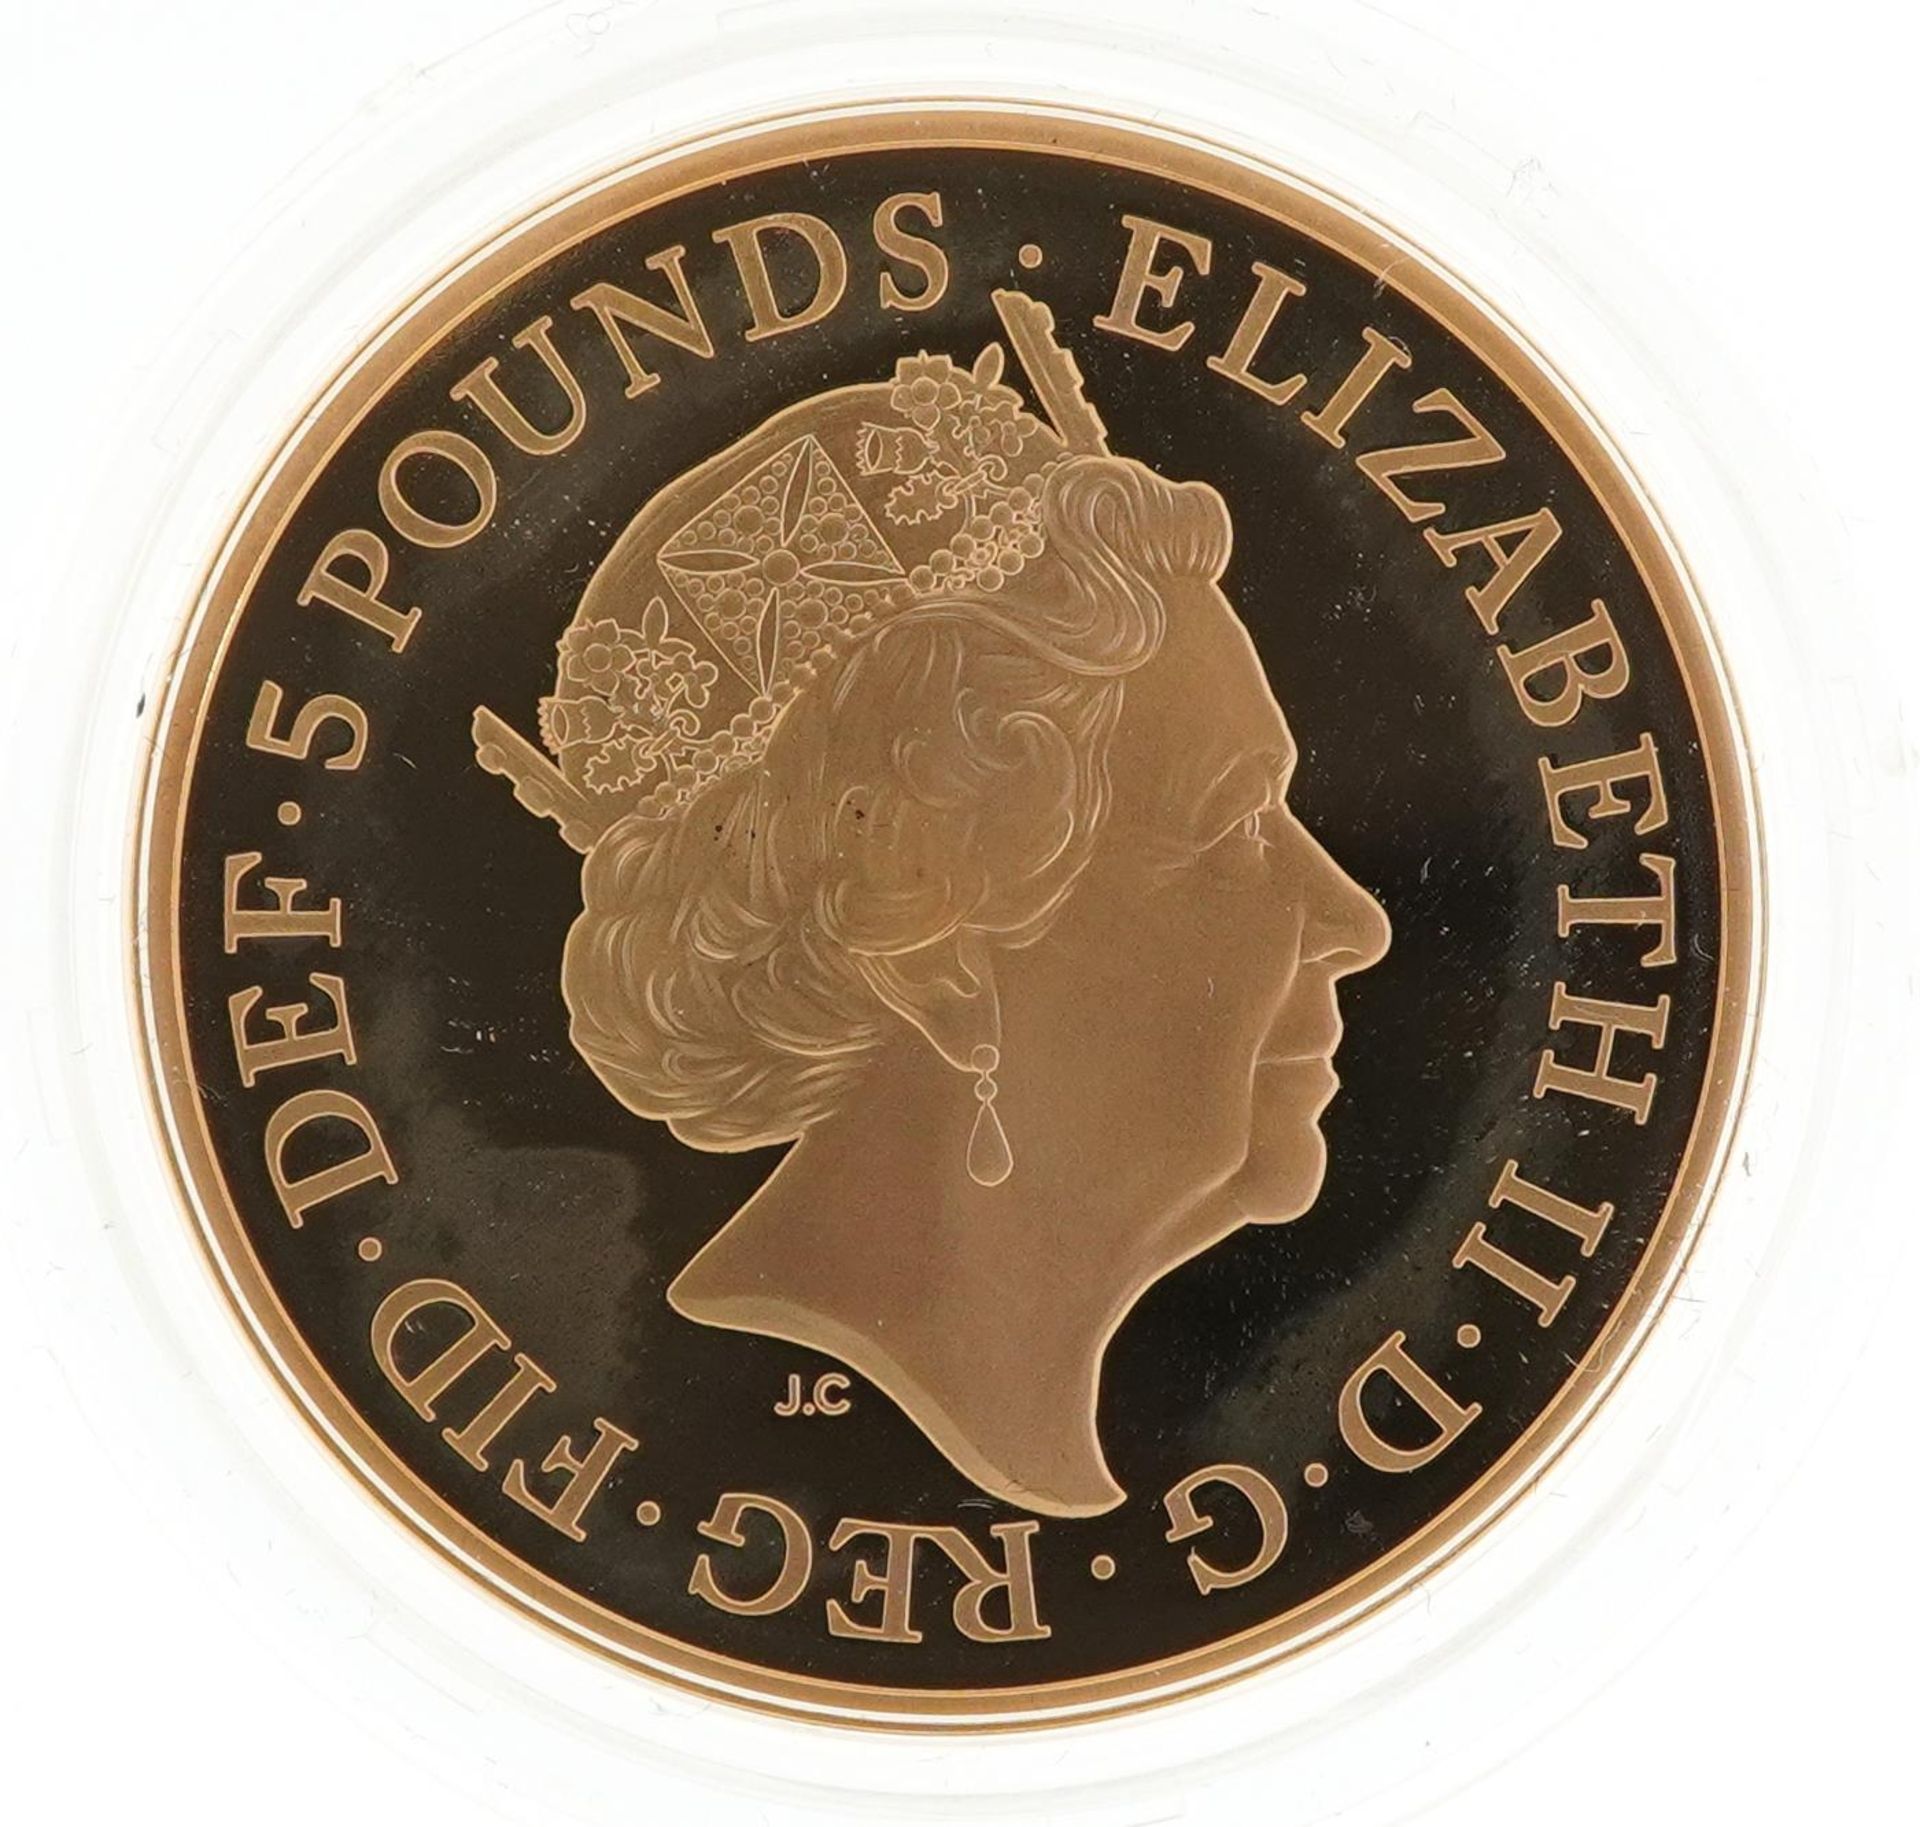 Elizabeth II 2017 gold proof five pound coin by The Royal Mint commemorating The Sapphire Jubilee of - Bild 3 aus 4